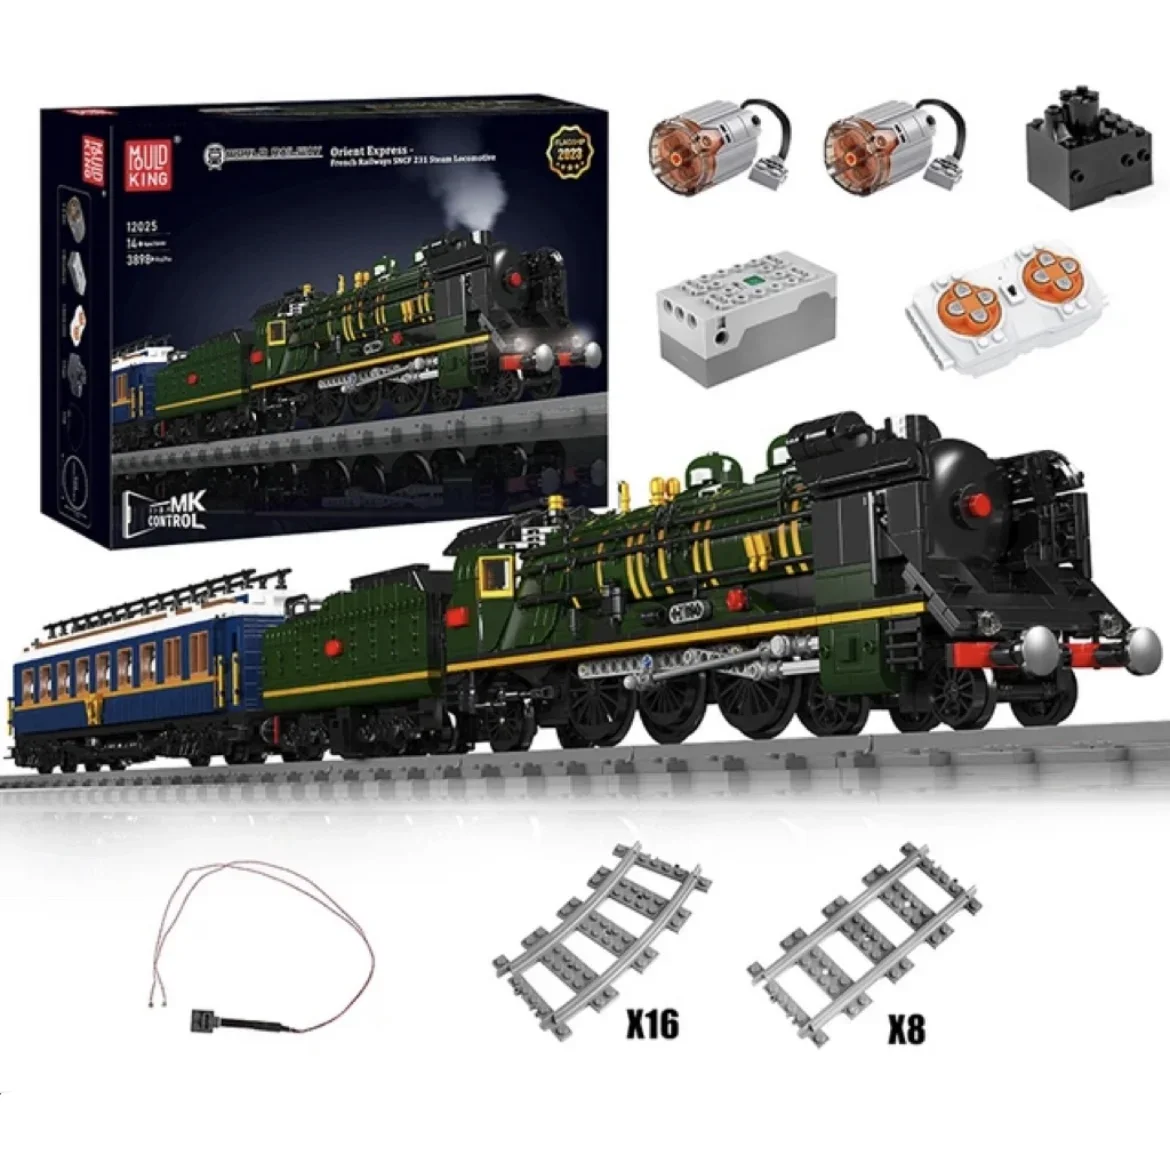 

Mould King 12025 Remote Controlled Steam Locomotive SNCF 231 Orient Express French Railways Train Lighting Building Blocks Set